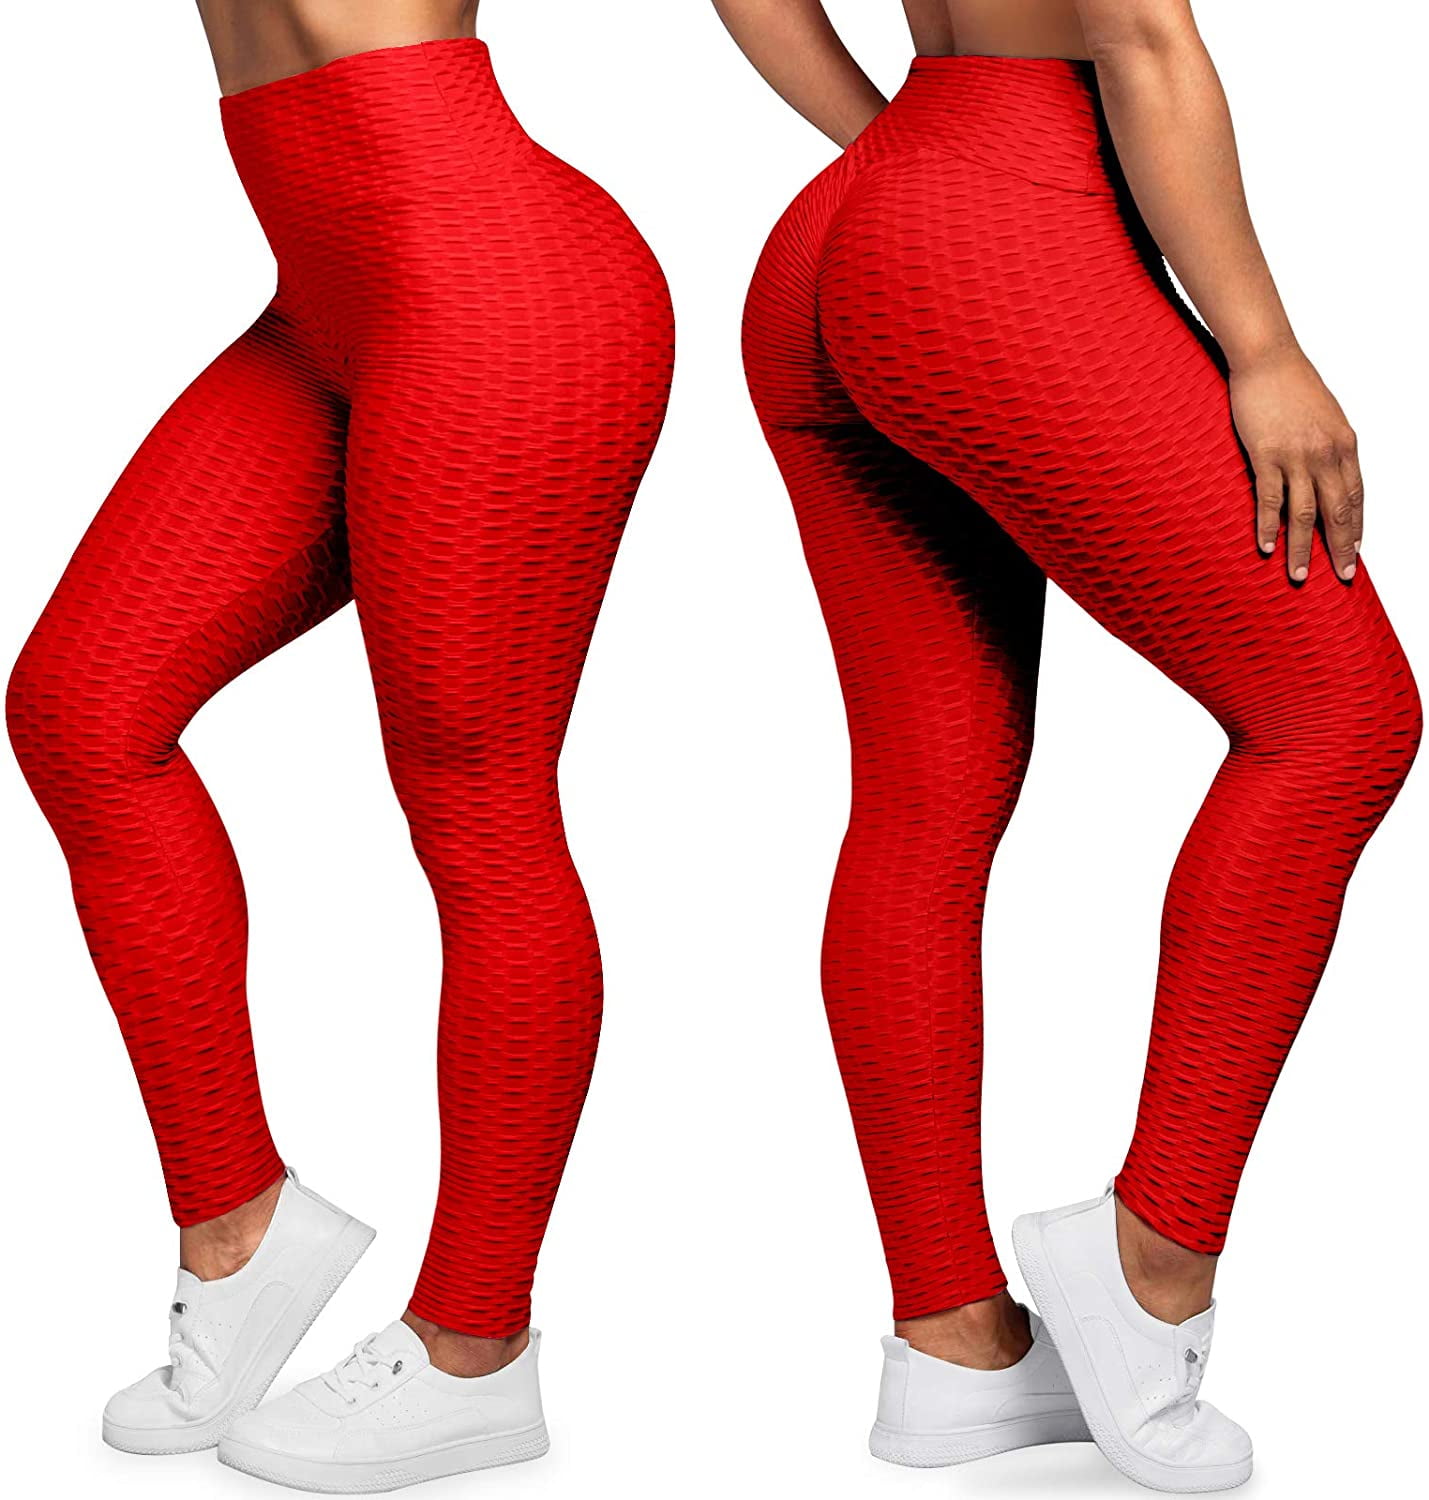 SAYFUT Anti Cellulite Textured Lifting Leggings for Women Scrunch High  Waist Yoga Pants Workout Honeycomb Ruched Tights Pants 